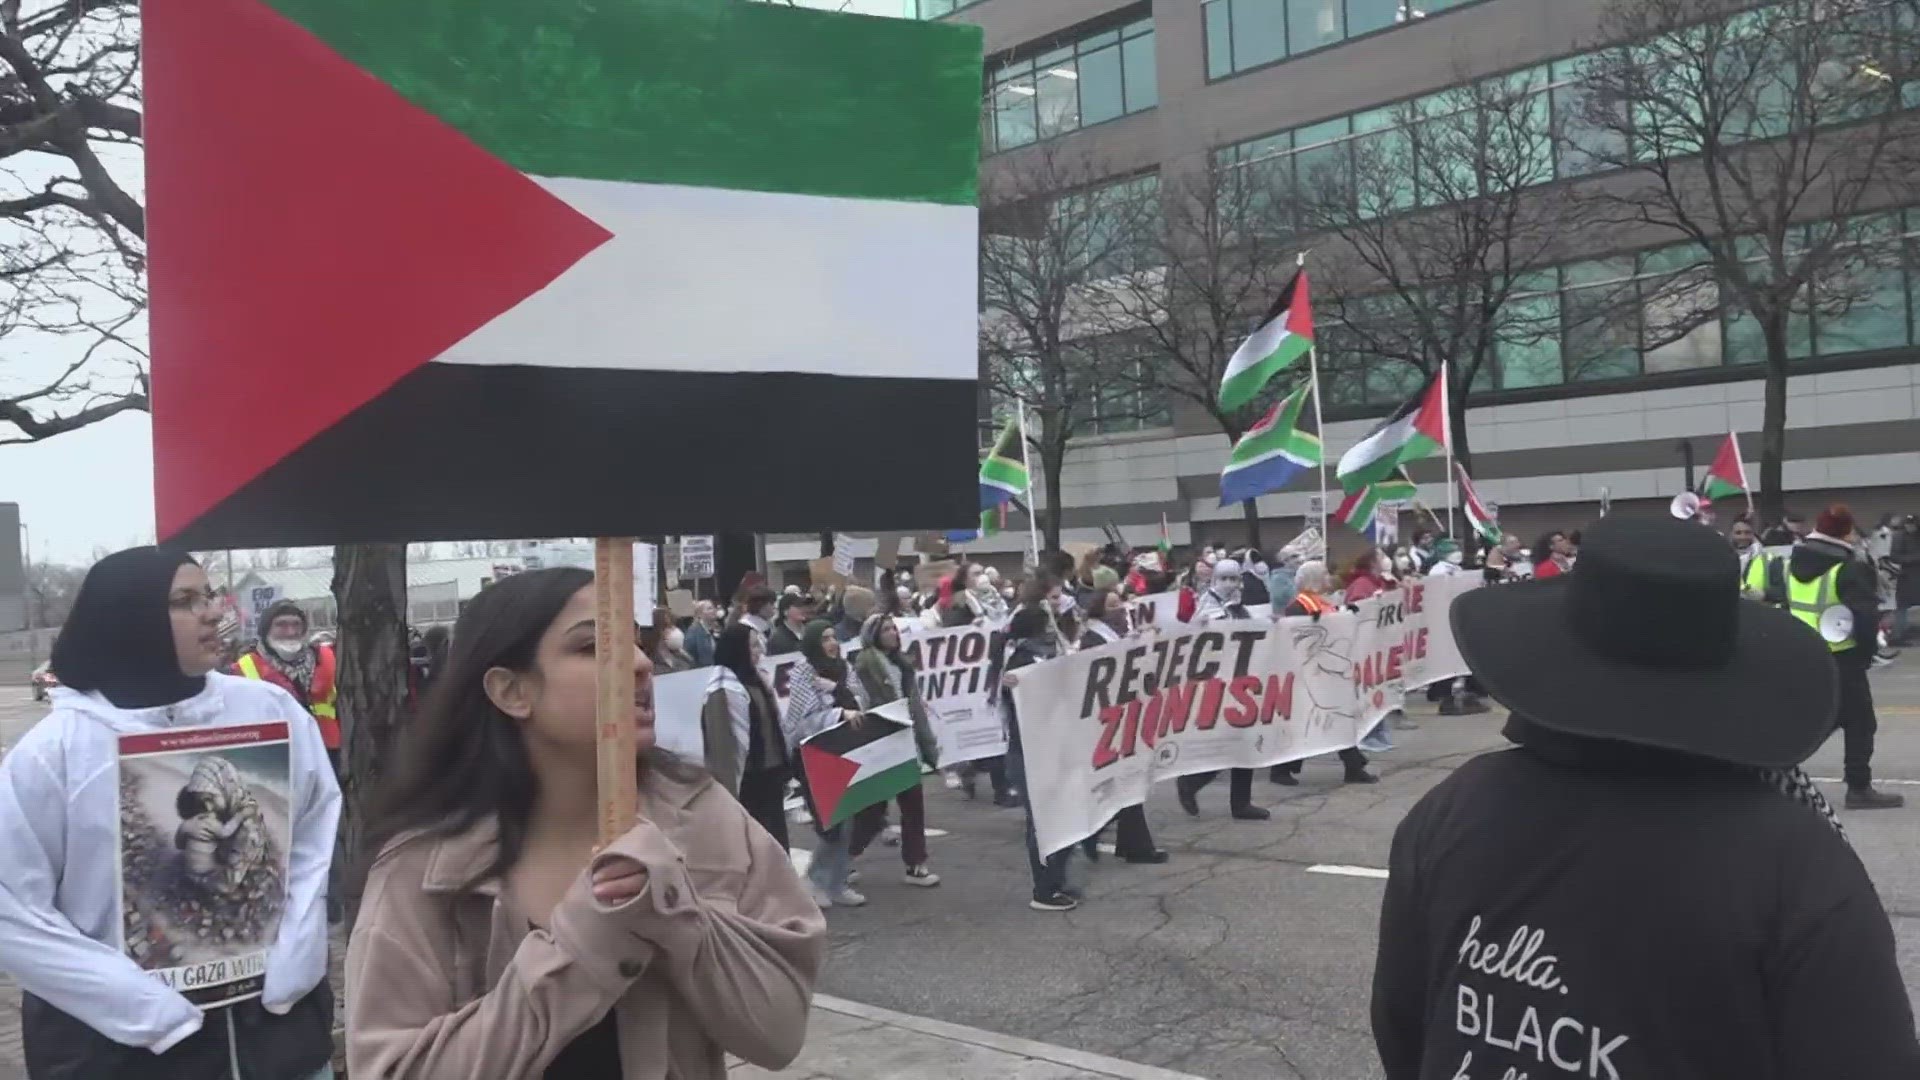 The group marched from the Rock and Roll Hall of Fame to Public Square then City Hall on Friday afternoon, calling for a ceasefire in Gaza.